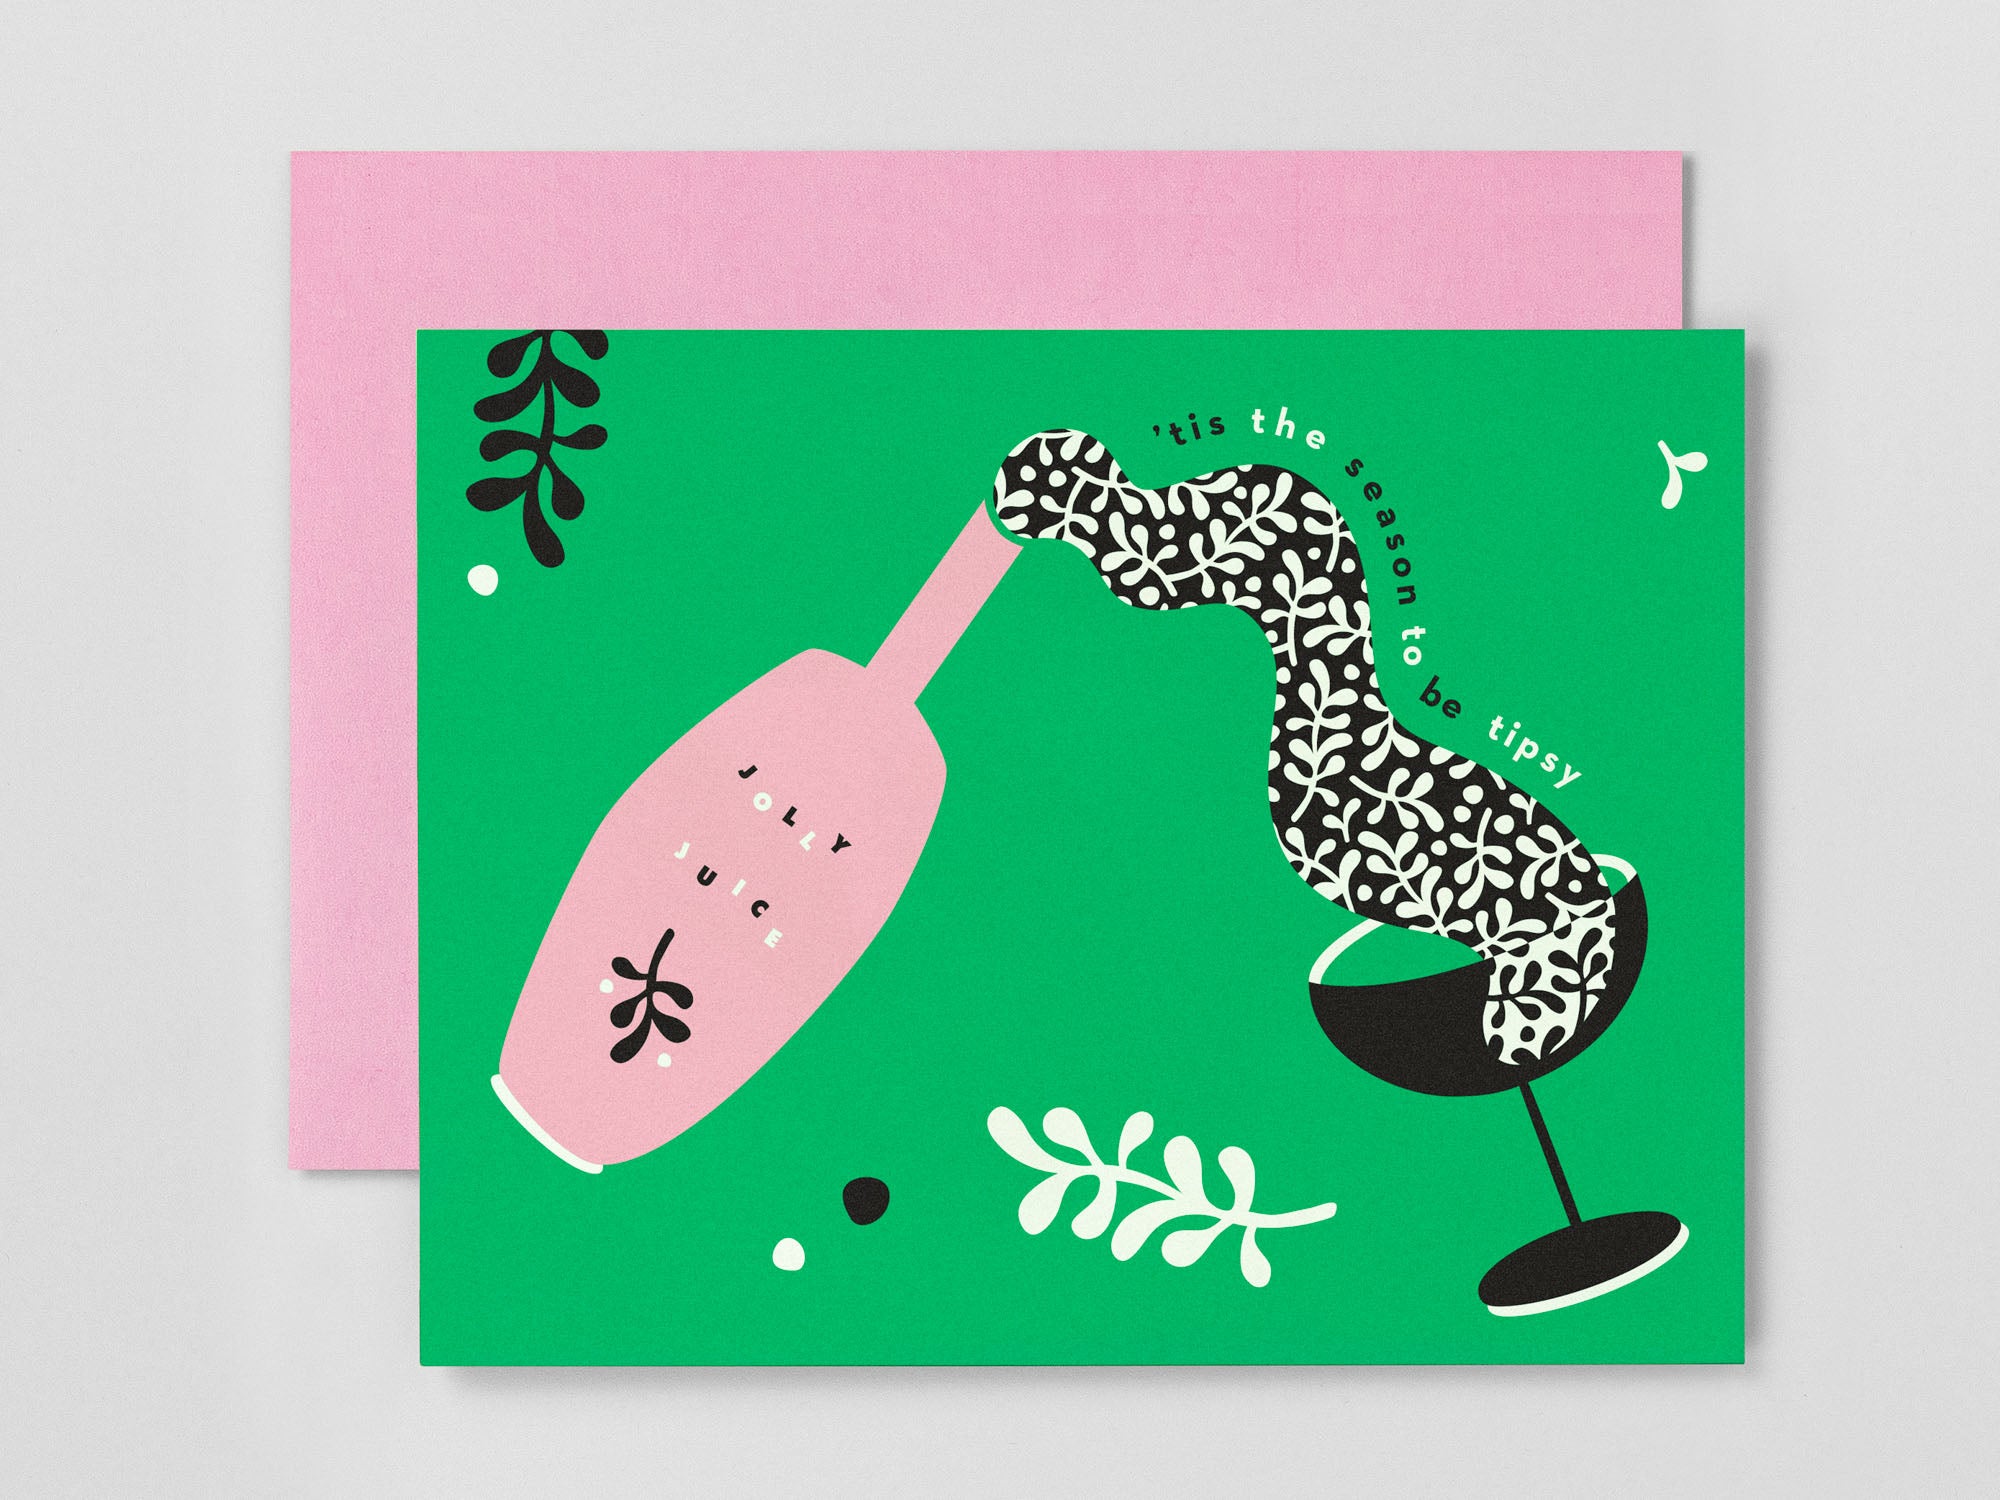 'Tis the Season to Be Tipsy Boozy Holiday Card, collaboration between Etsy and Match.com. Designed by @mydarlin_bk